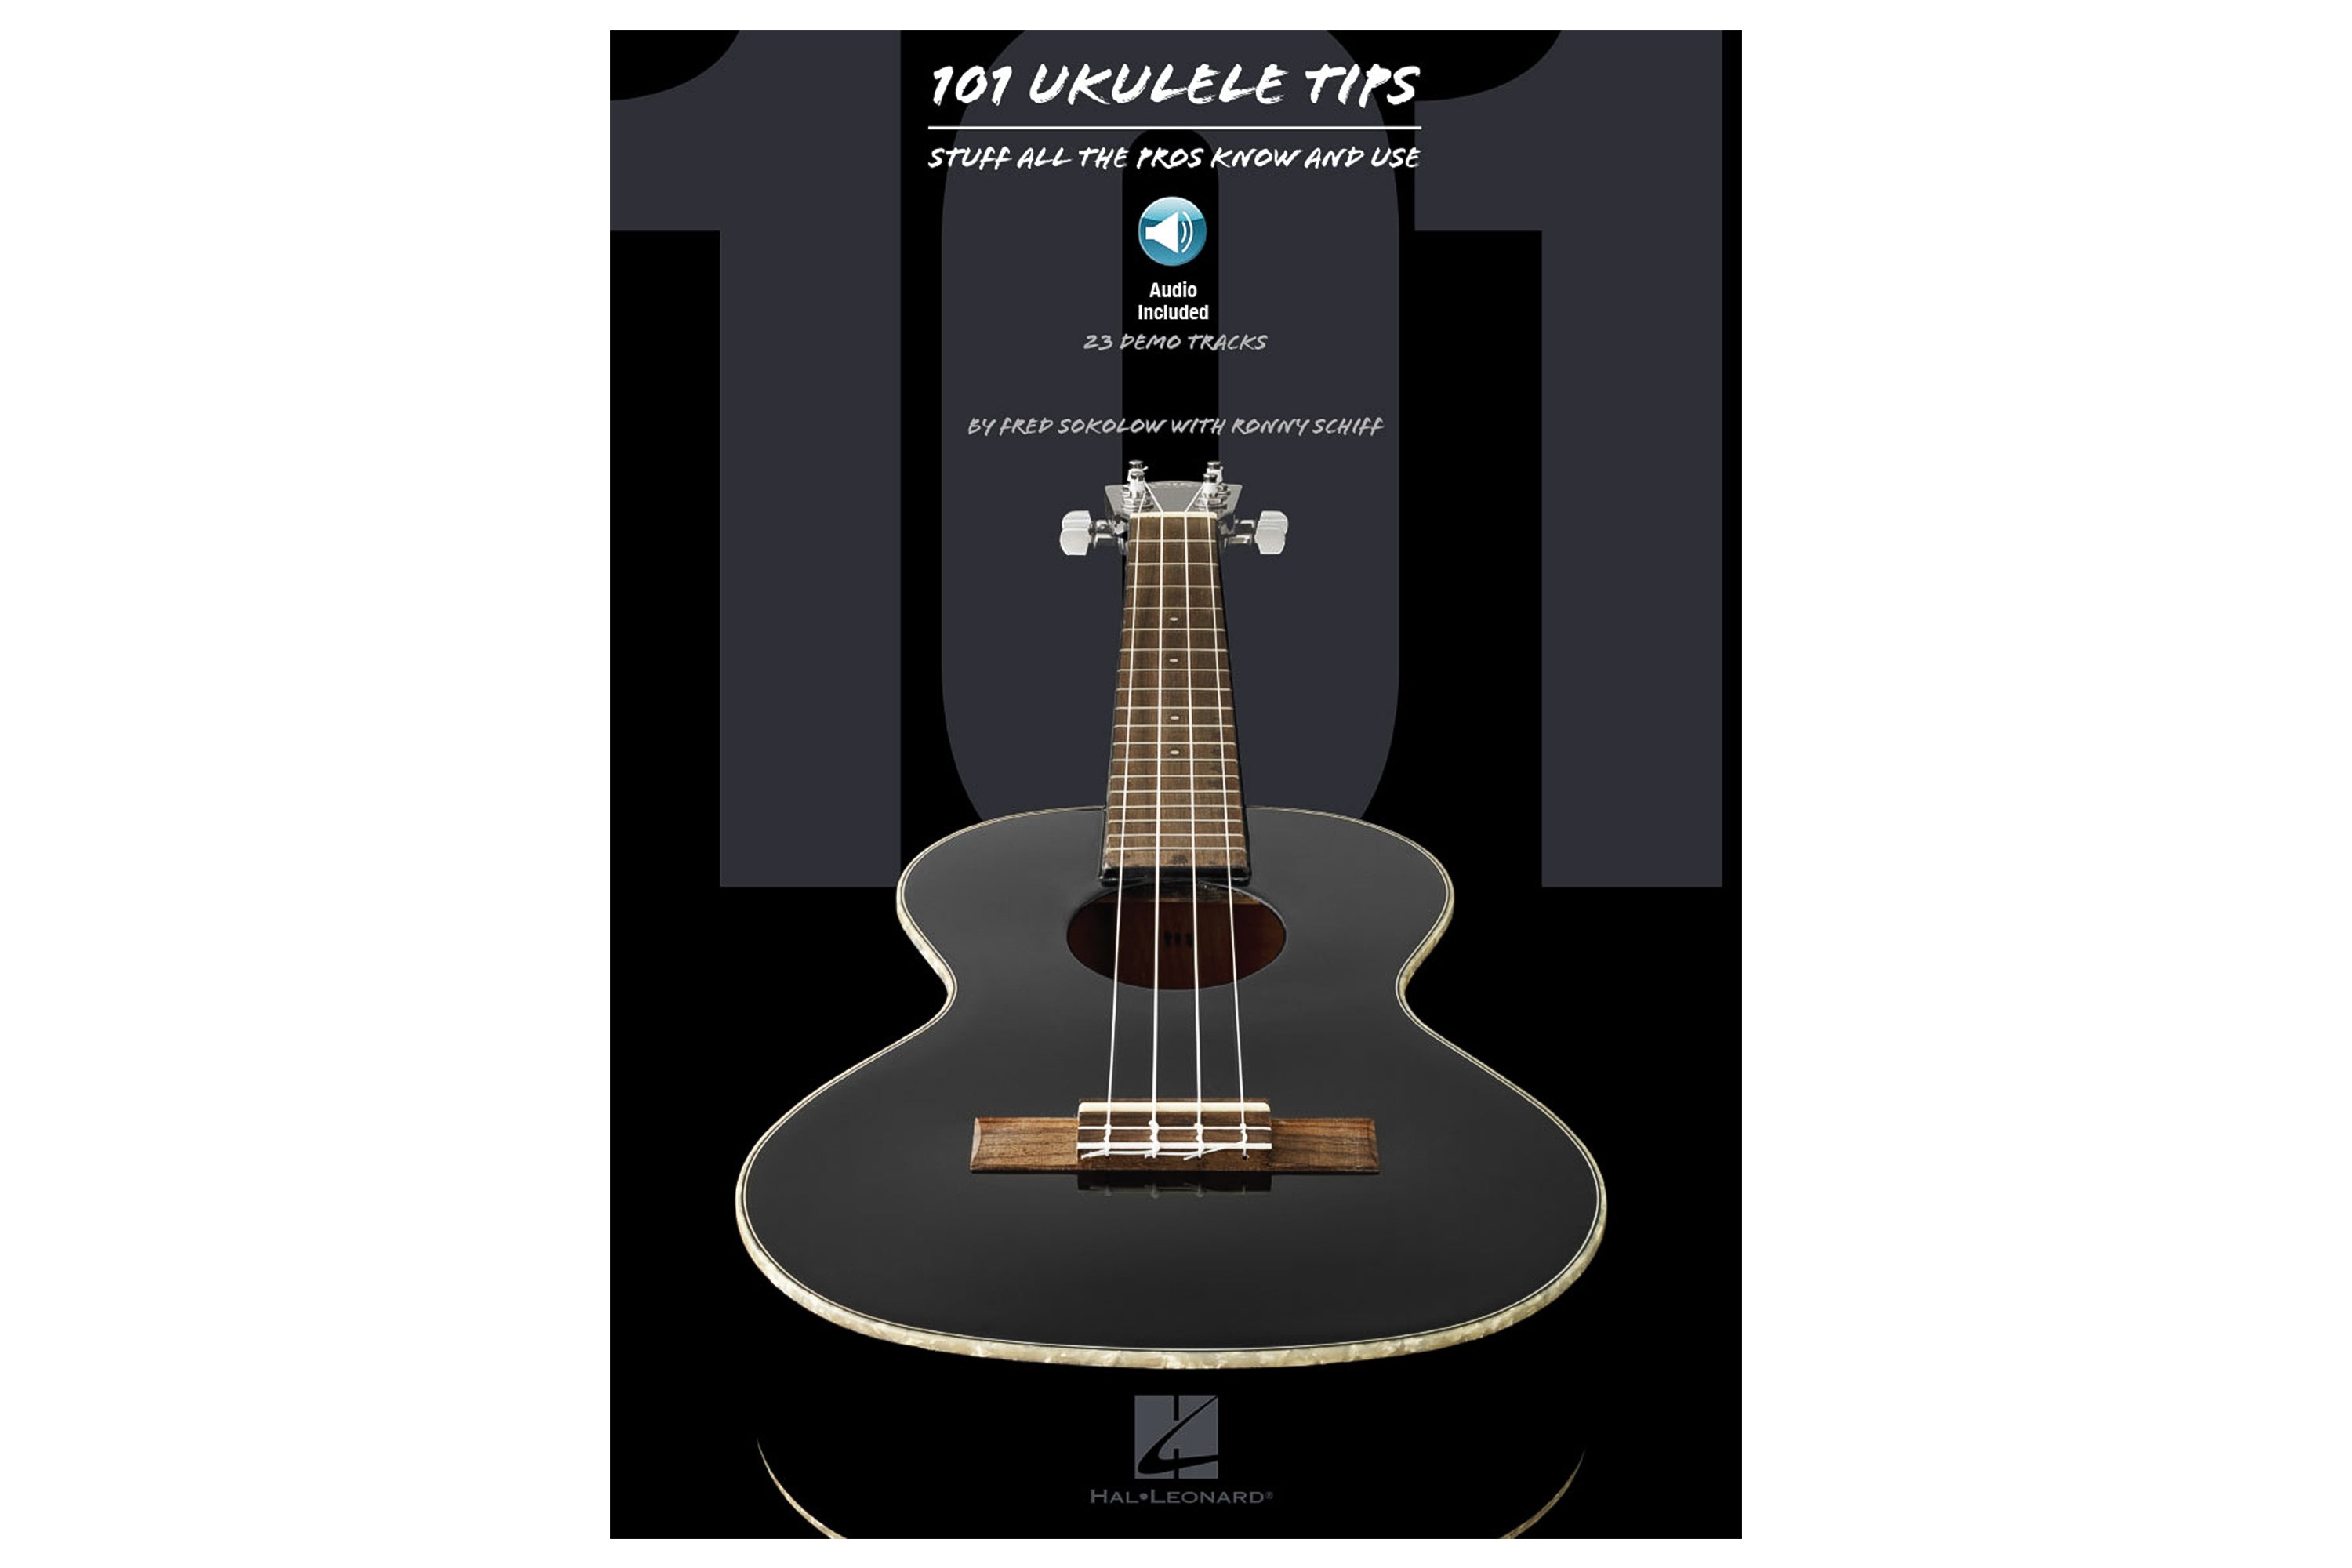 101 Ukulele Tips - Stuff All the Pros Know and Use